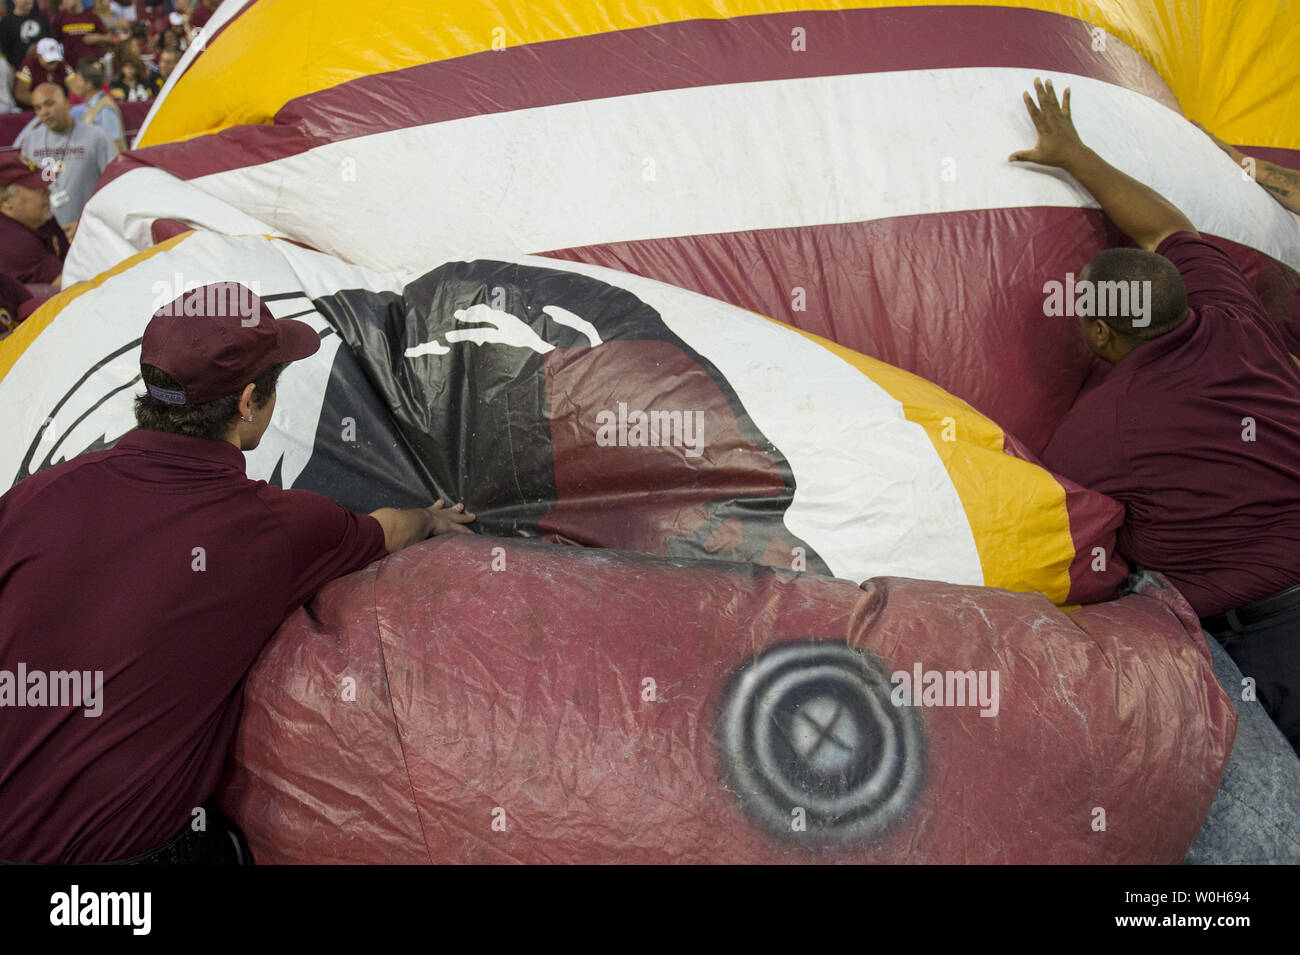 Members of the Washington Redskins staff deflate a giant Redskins helmet during pre-game activities prior to the Redskins game against the Pittsburgh Steelers at FedEx Field in Landover, Maryland on August 19, 2013.  UPI/Kevin Dietsch Stock Photo